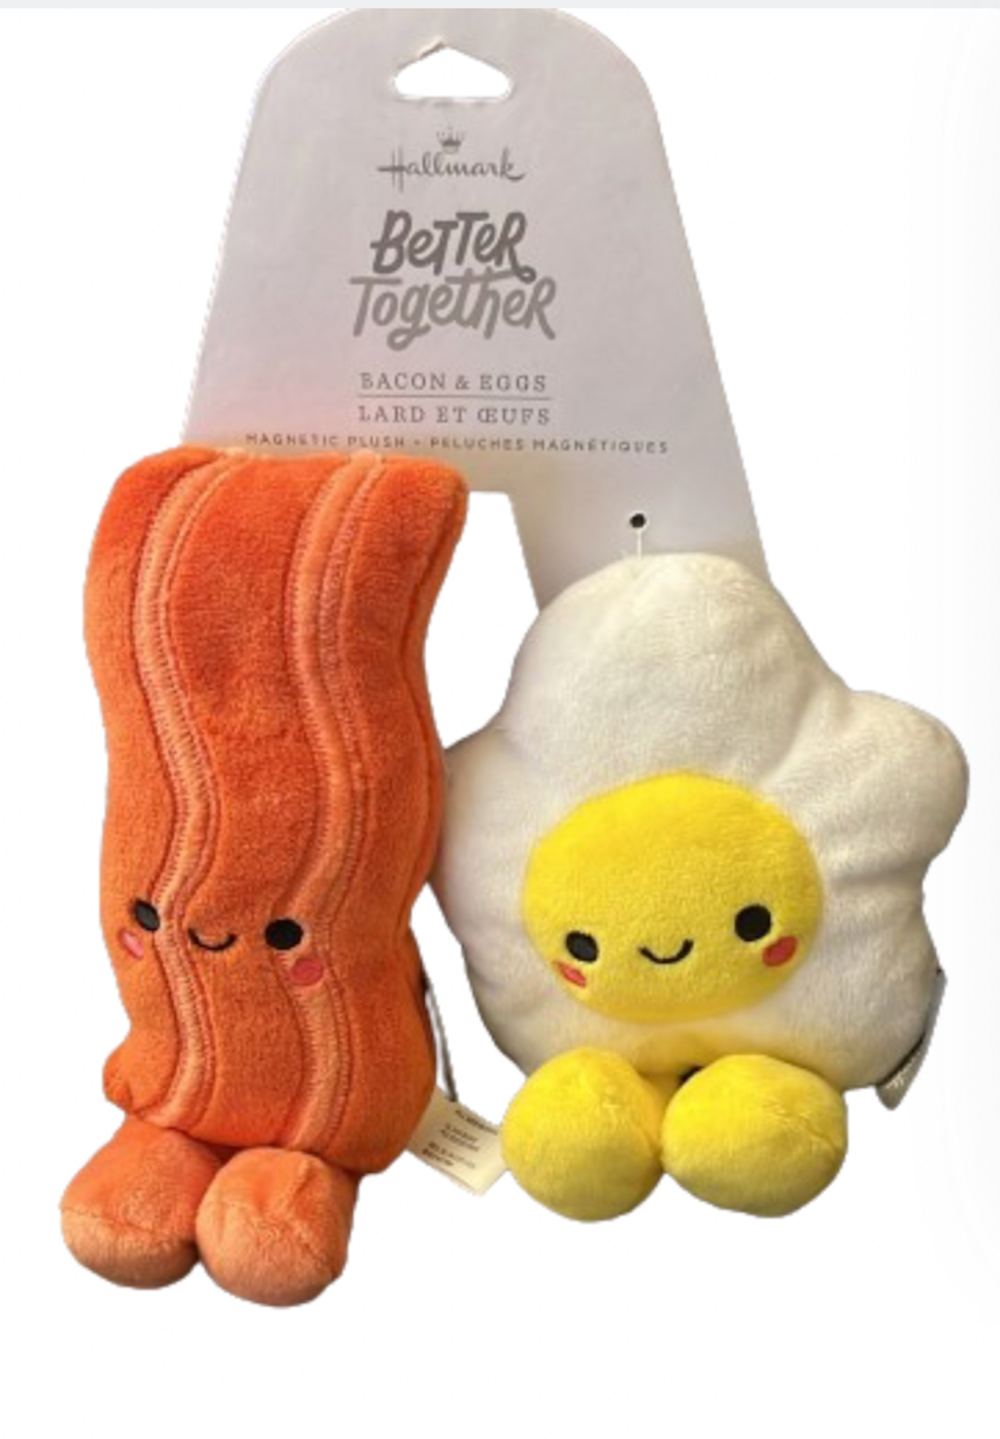 Hallmark Valentine Better Together Bacon and Eggs Magnetic Plush New with Card